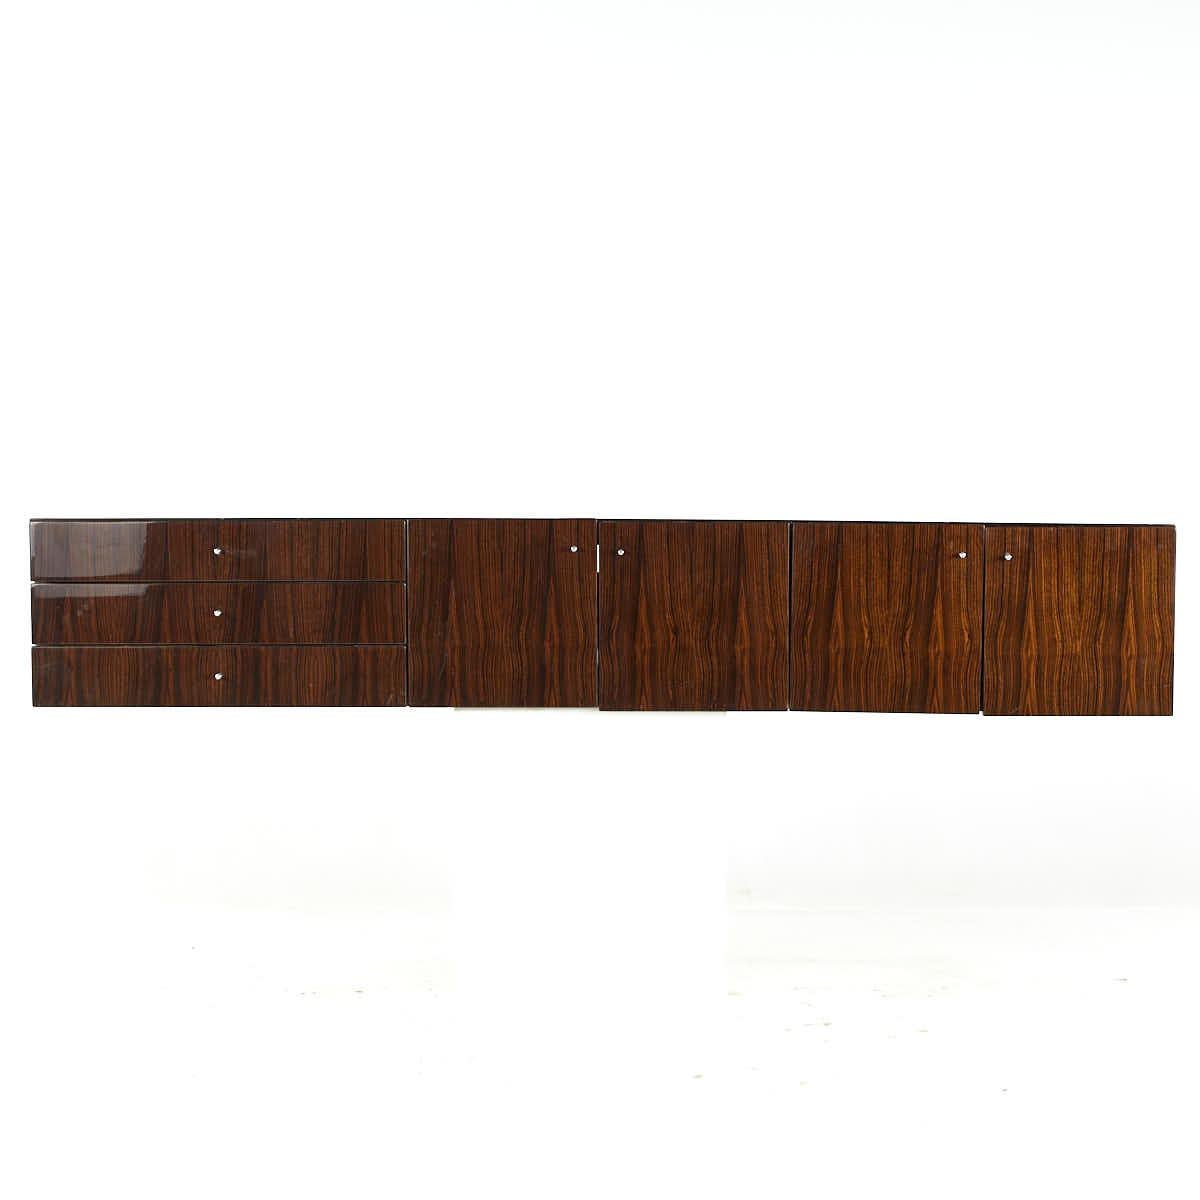 Saporiti Mid Century Italian Rosewood Wall Mounted Hanging Buffet

This buffet measures: 83 wide x 19.75 deep x 14 inches high

All pieces of furniture can be had in what we call restored vintage condition. That means the piece is restored upon